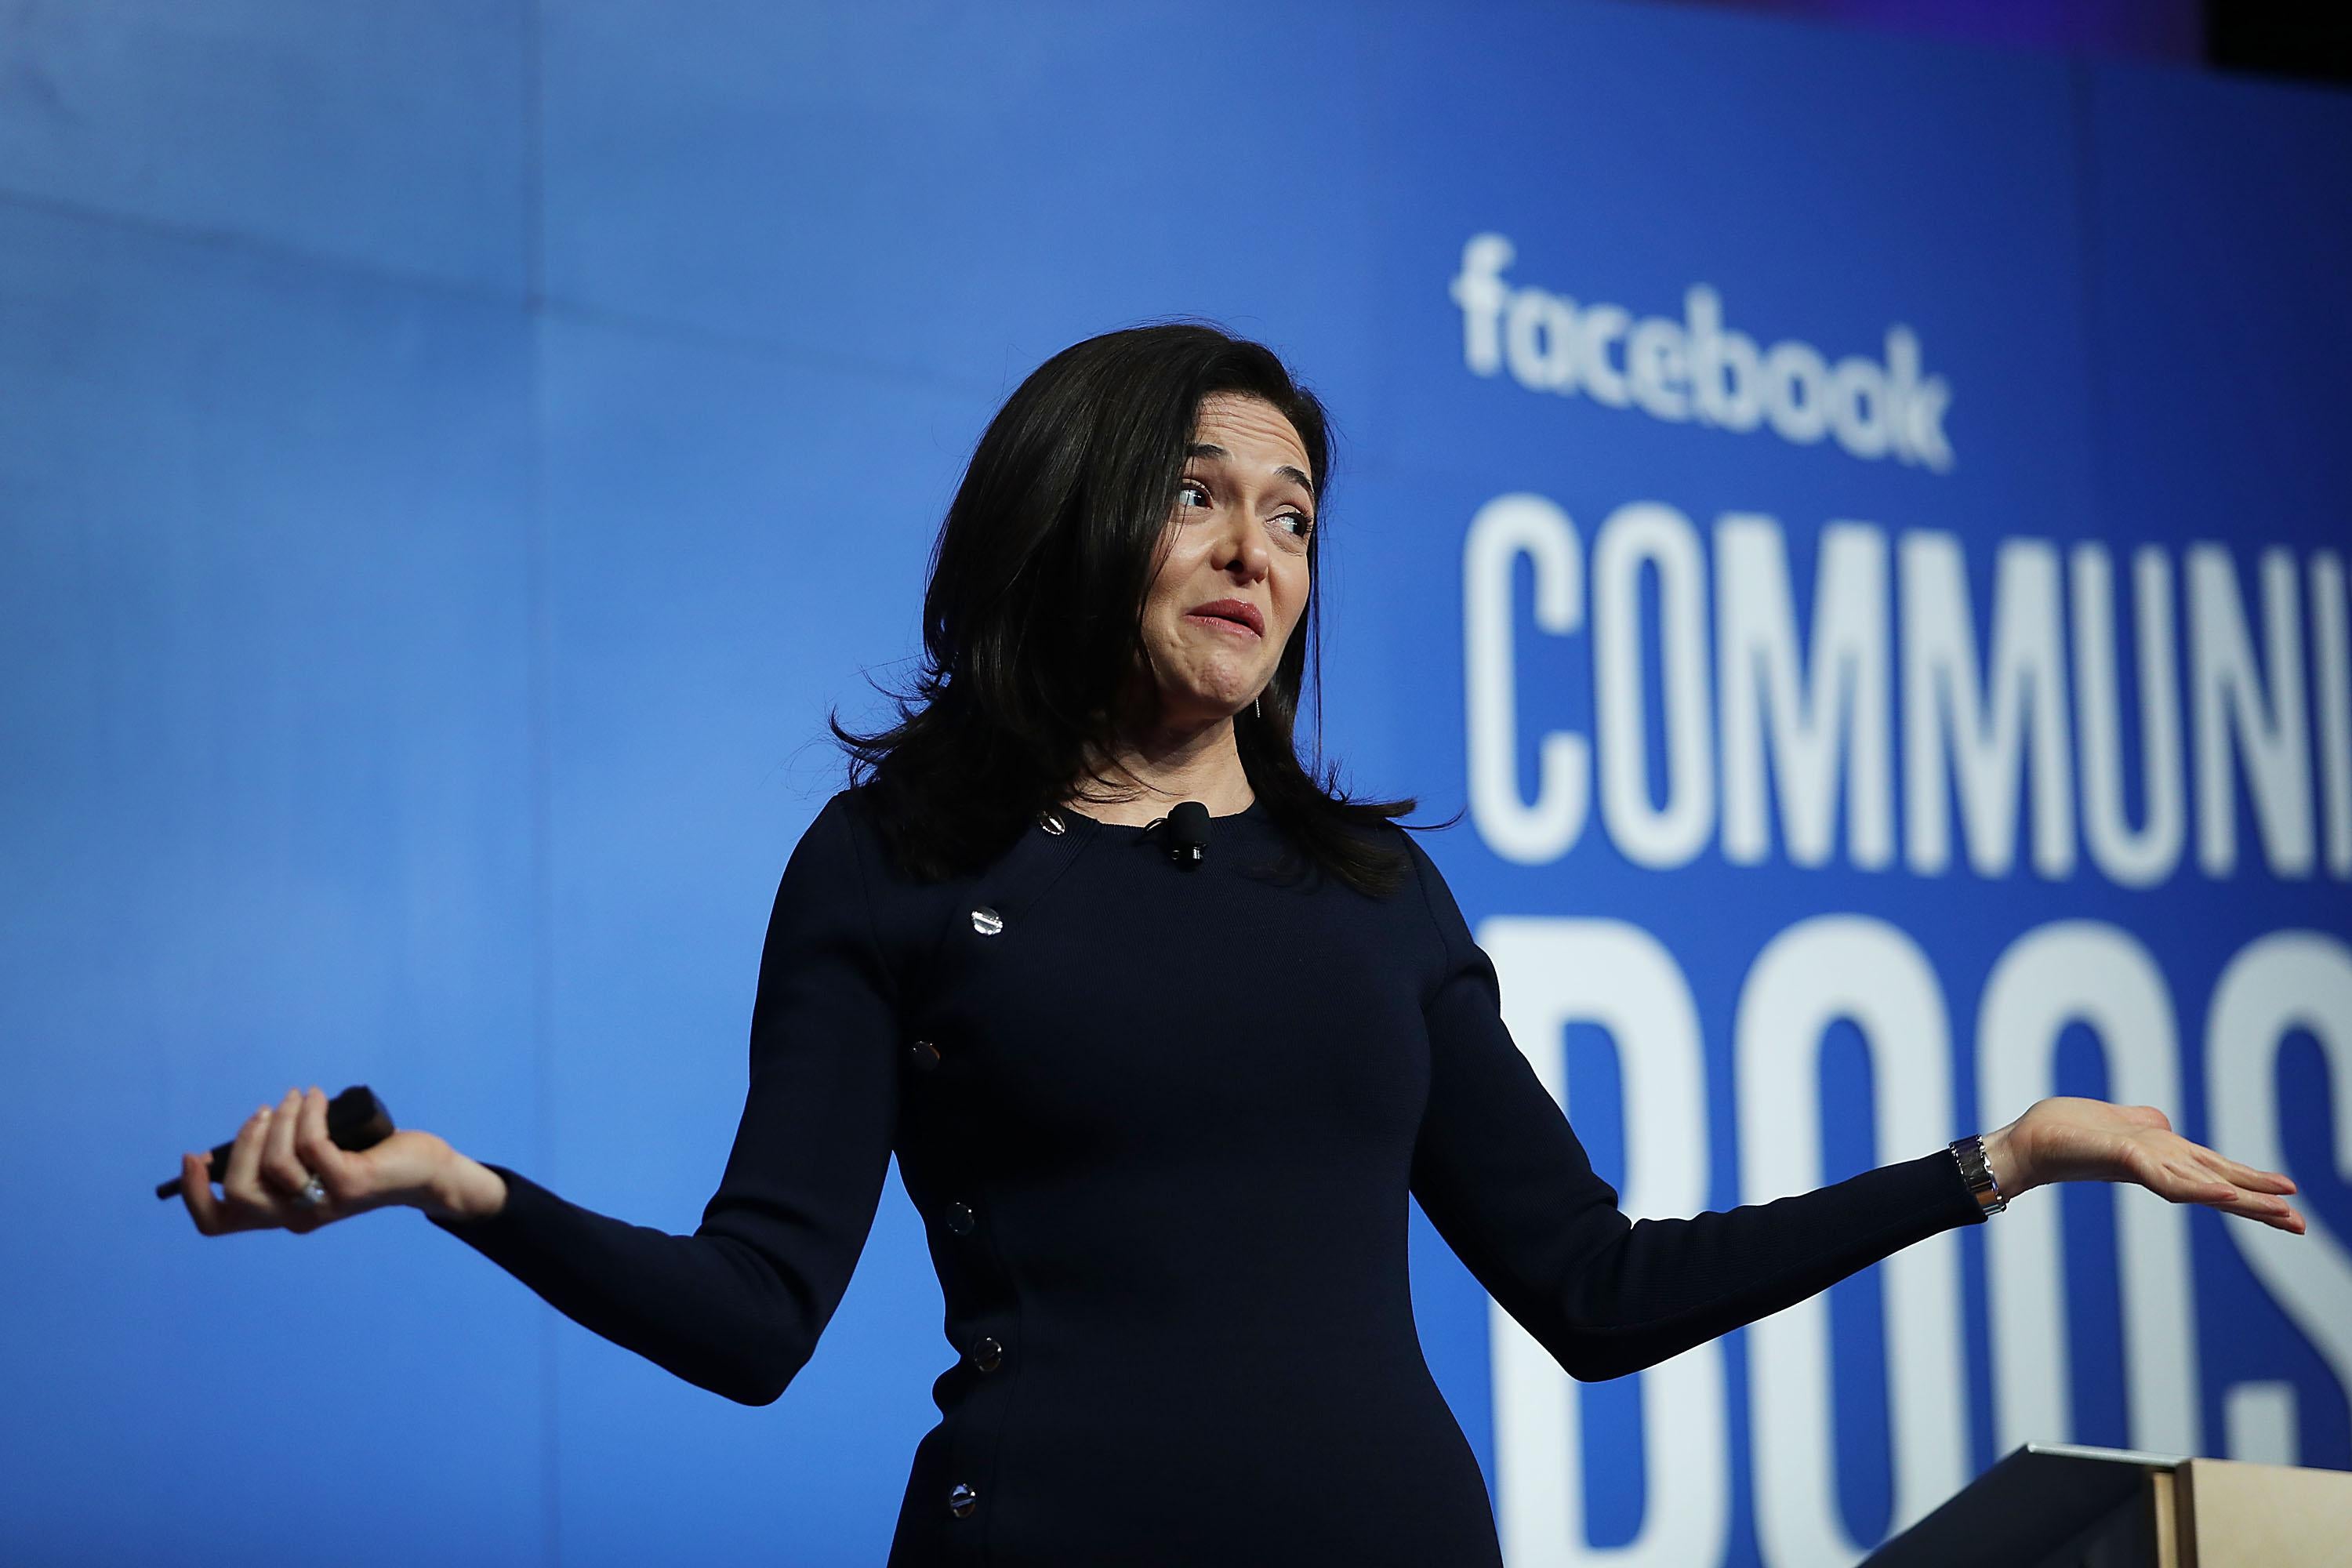 MIAMI, FLORIDA - DECEMBER 18: Facebook Chief Operating Officer Sheryl Sandberg speaks during a Facebook Community Boost event at the Knight Center on December 18, 2018 in Miami, Florida. The Community Boost event is the last of a 50 city tour across the U.S. and is put on by the social media company to give people access to in-person training programs, which includes free workshops and networking designed to help small businesses use the social media platform. (Photo by Joe Raedle/Getty Images)